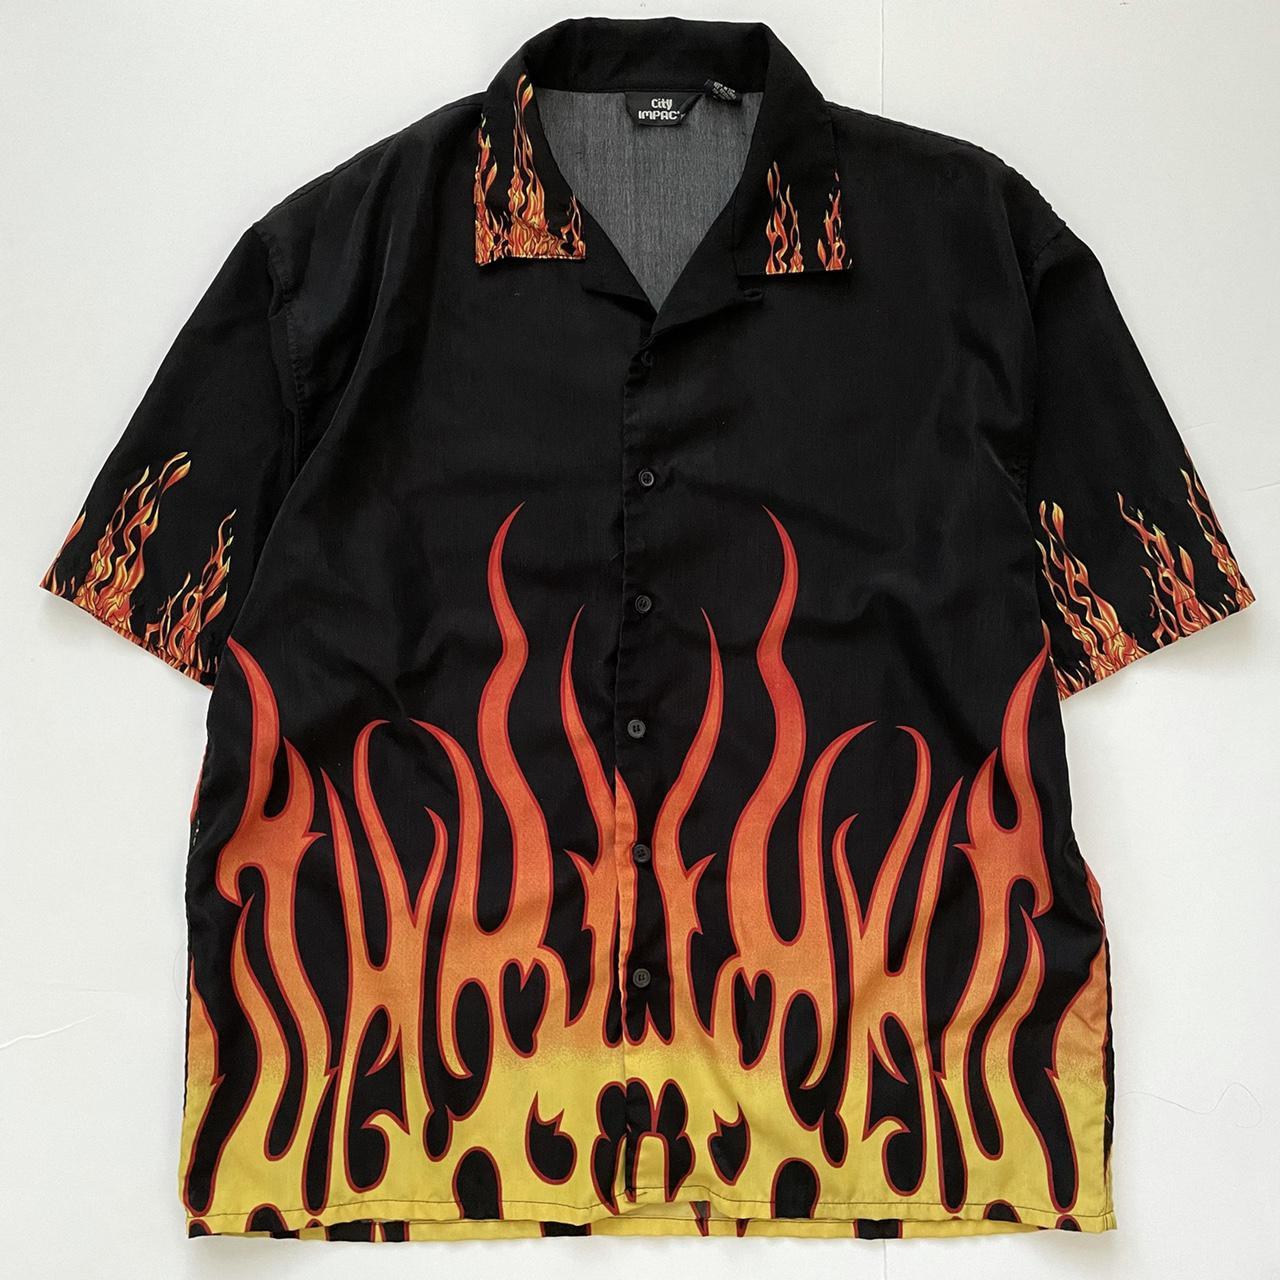 Product Image 3 - Vintage 1990s Guy Fieri Flame